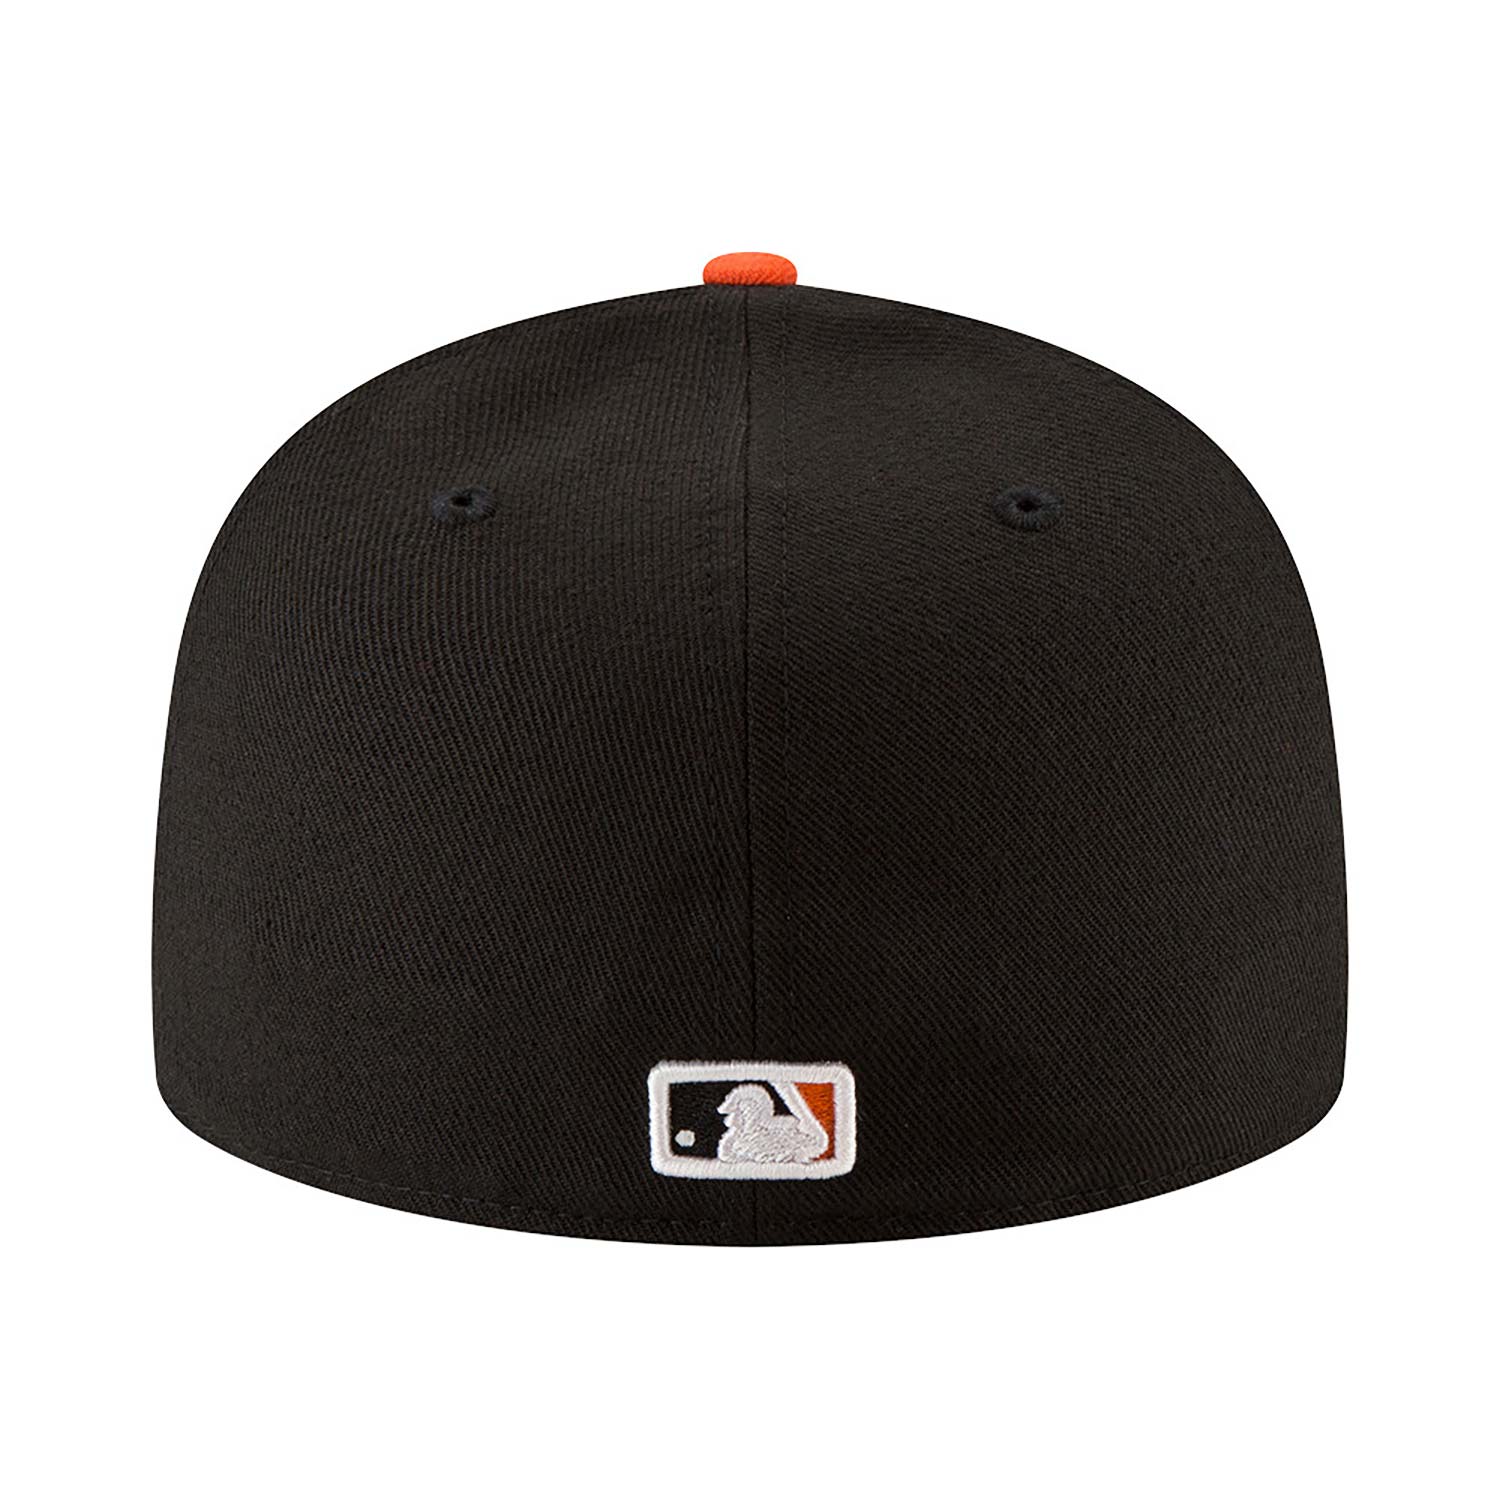 San Francisco Giants Authentic On Field Game Nero 59FIFTY Cap